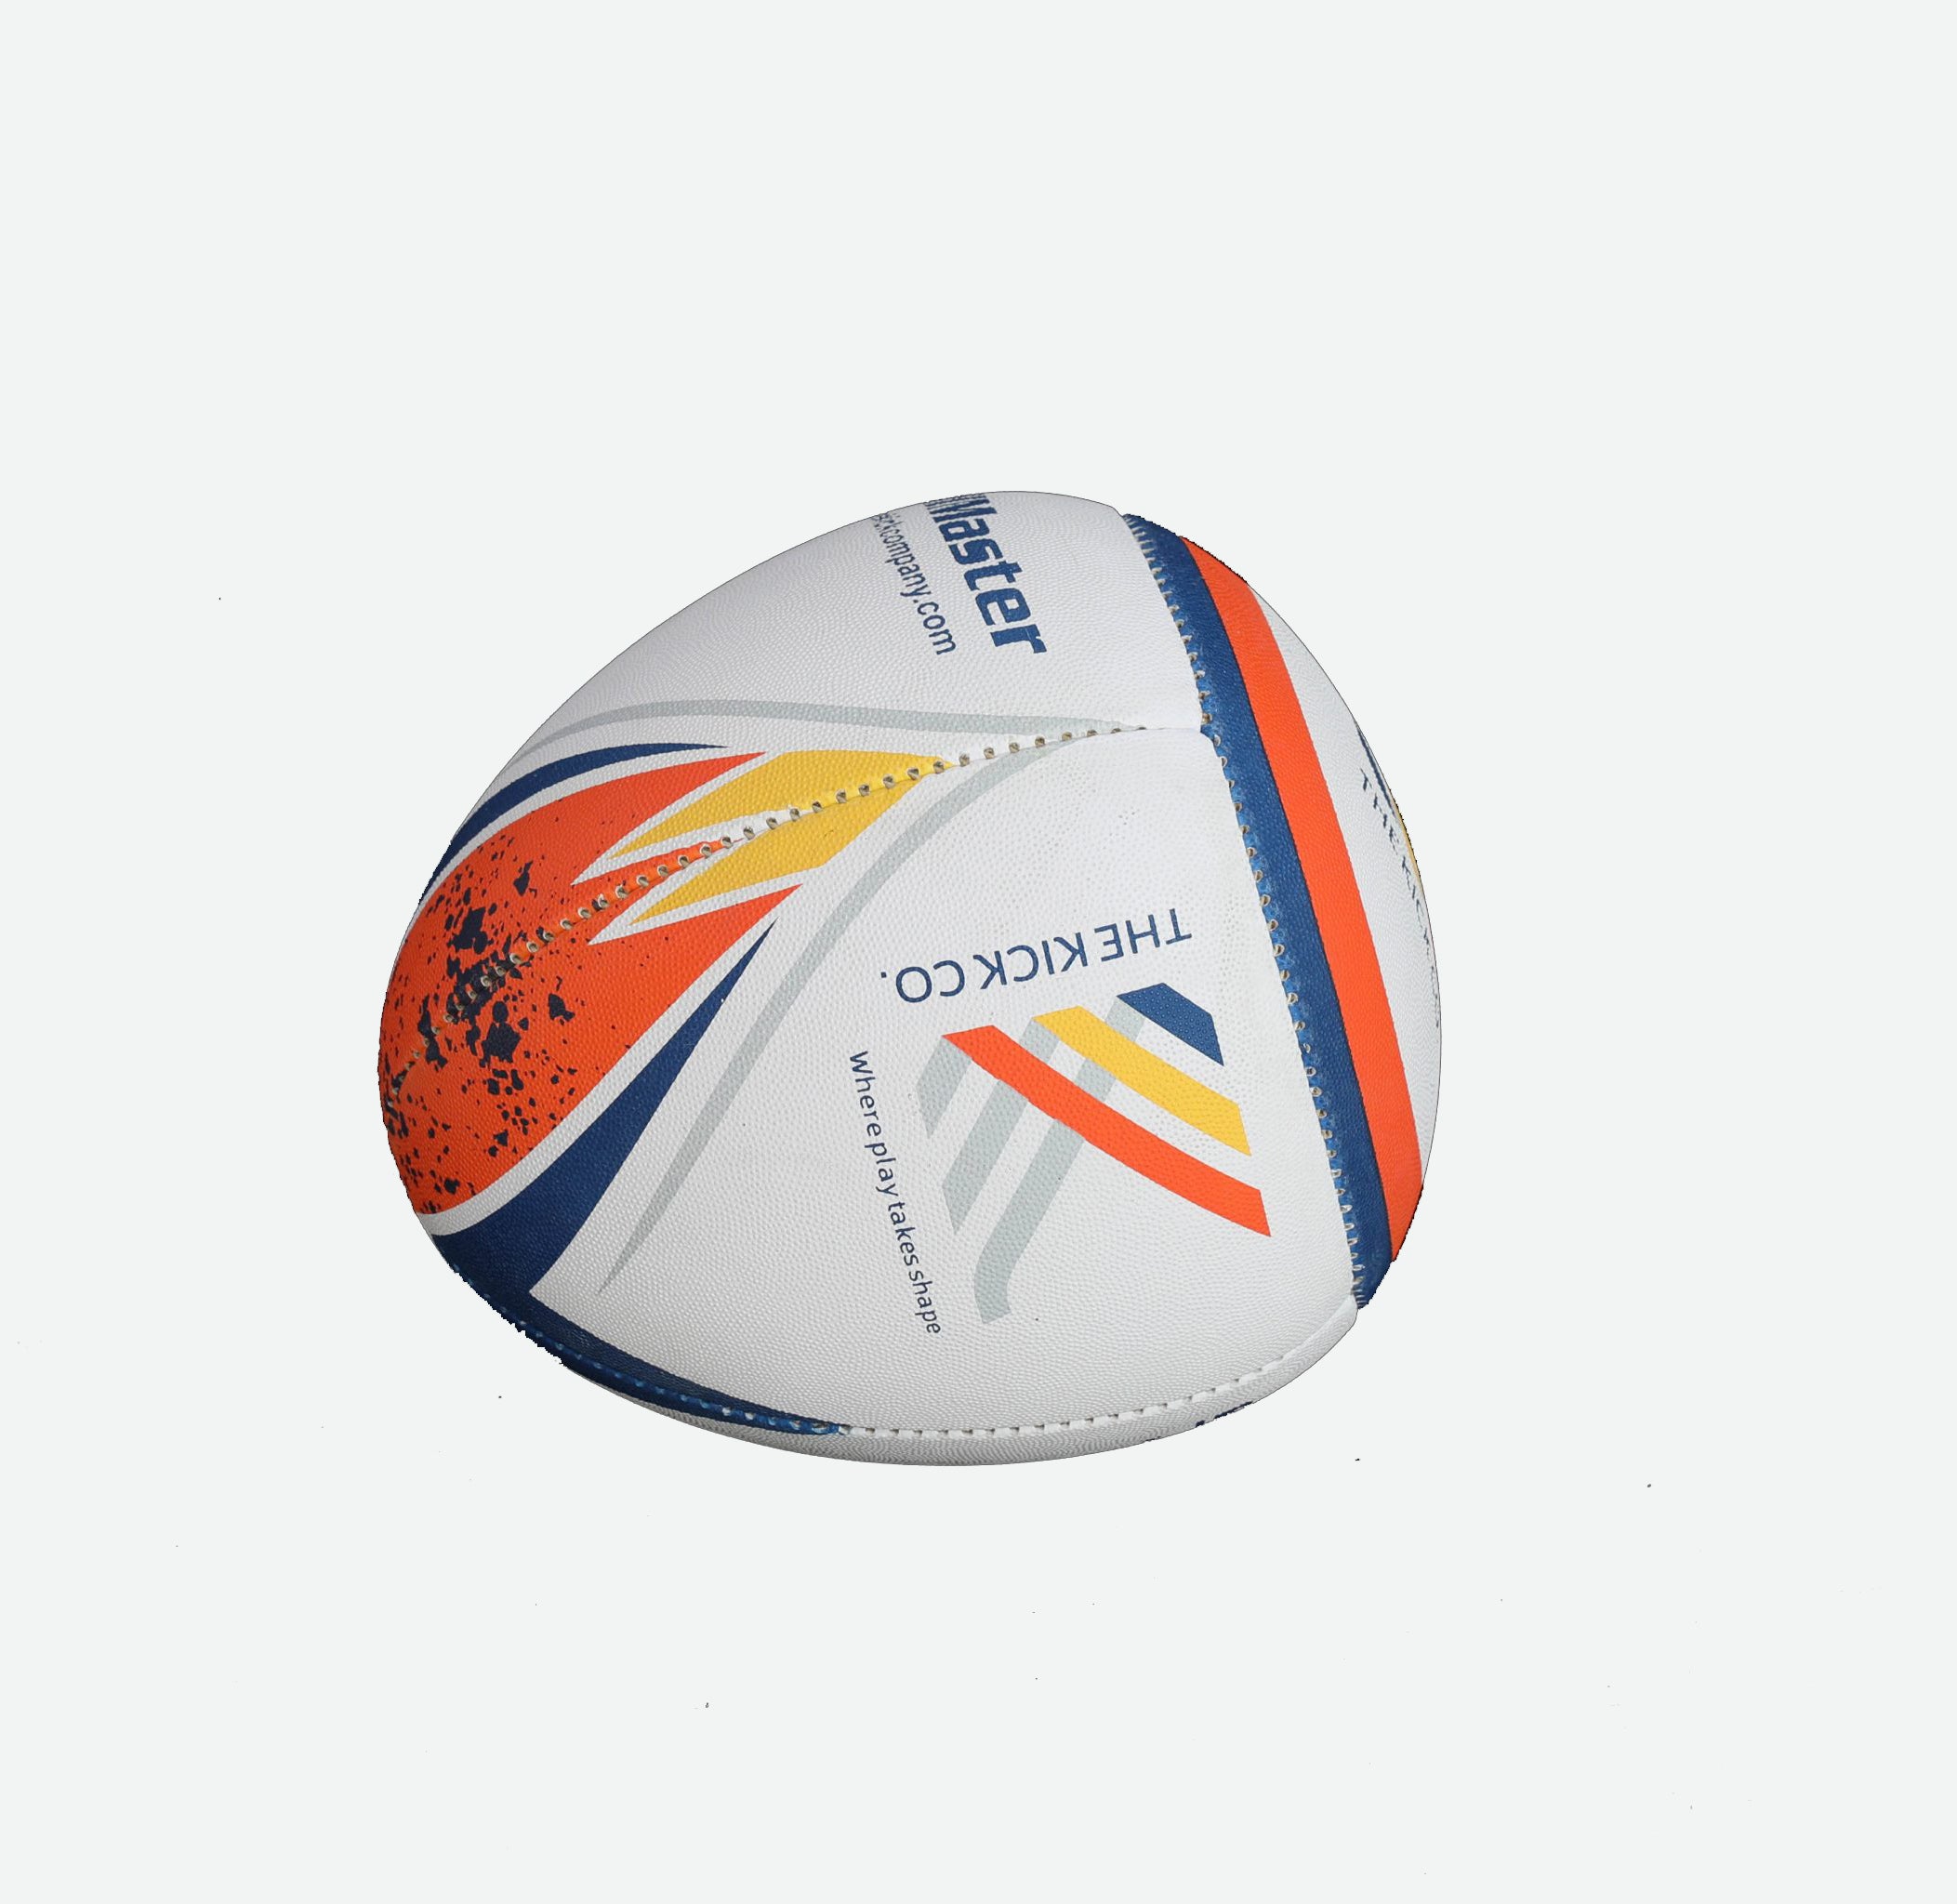 Rugby Reflex ball in The Kick Co livery.